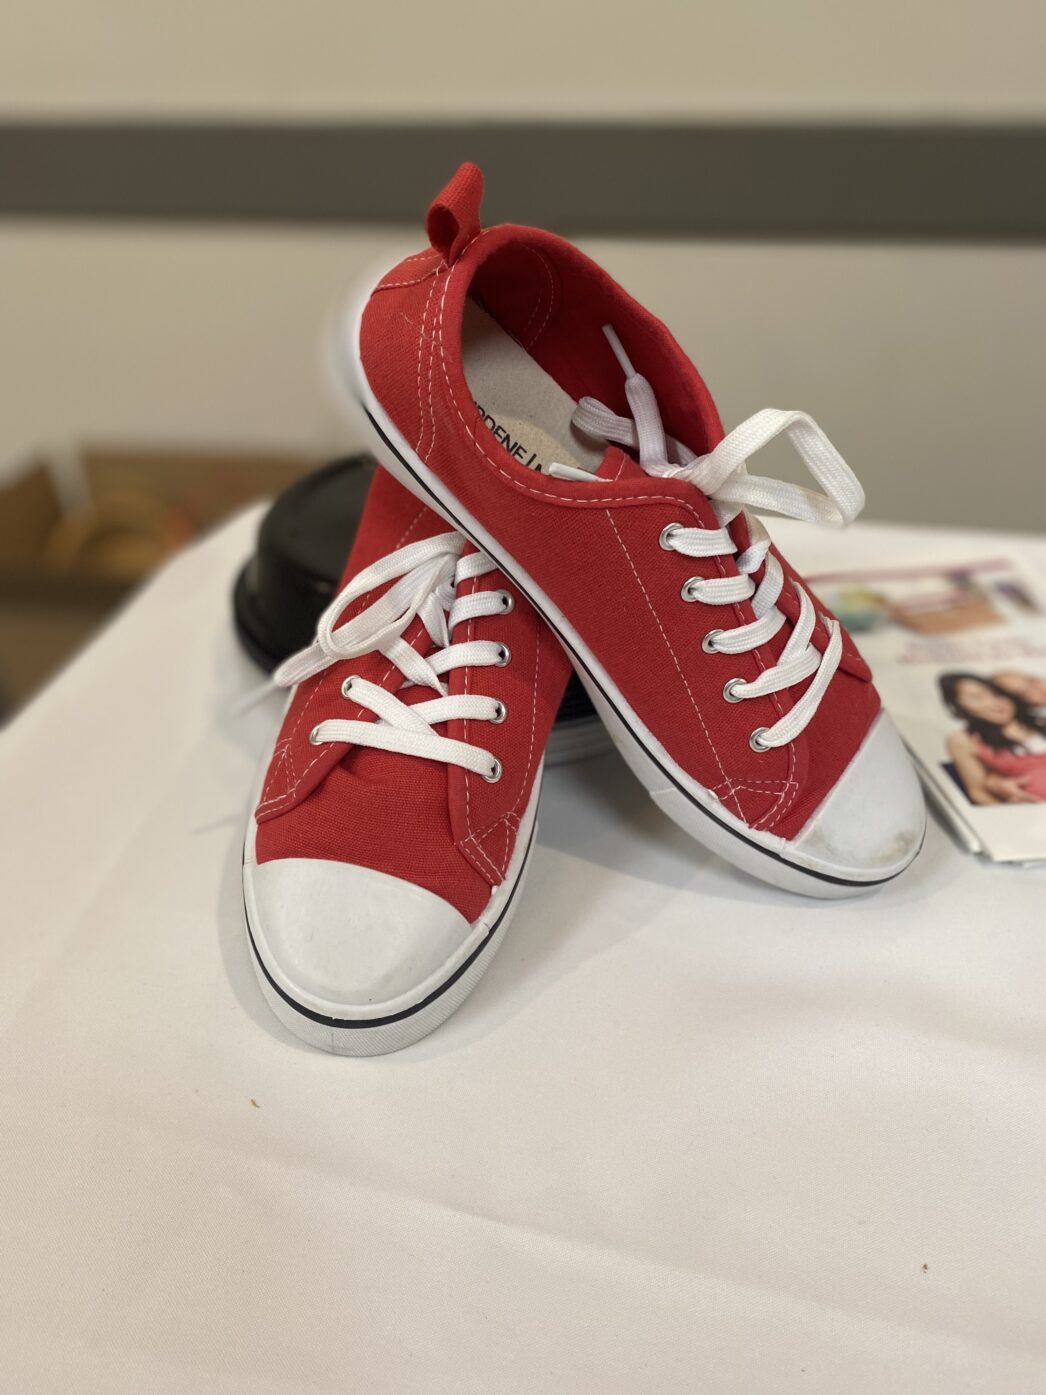 Red sneakers propped up on a table with a white table cloth to bring attention to the Red Shoes Rock movement